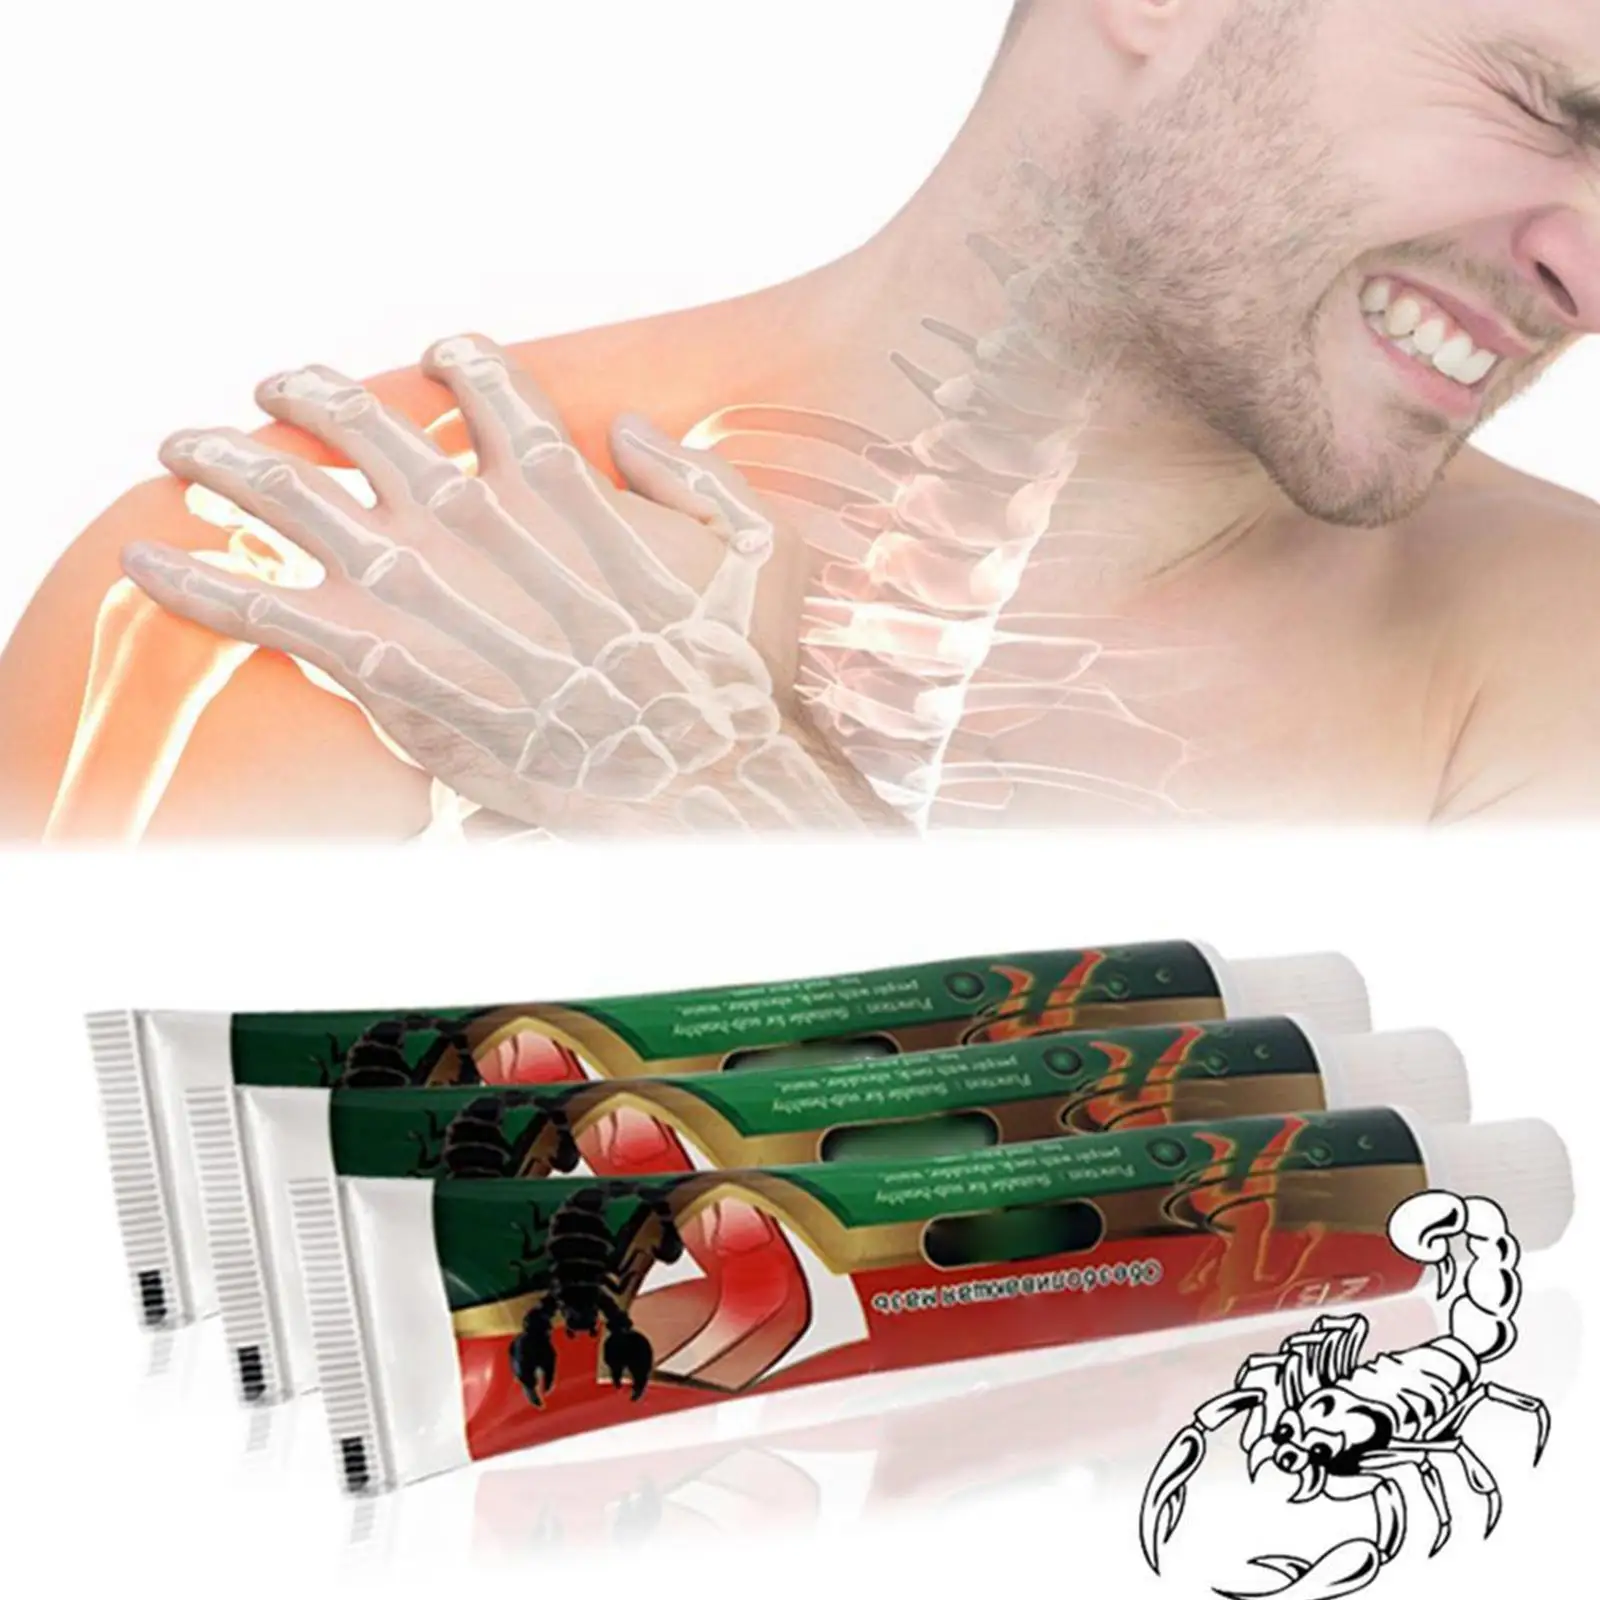 

Scorpion Analgesic Cream Muscle Joint Sprain Pain Relief Massage 20g Muscle Relieve Soreness Sore Cream A6L4